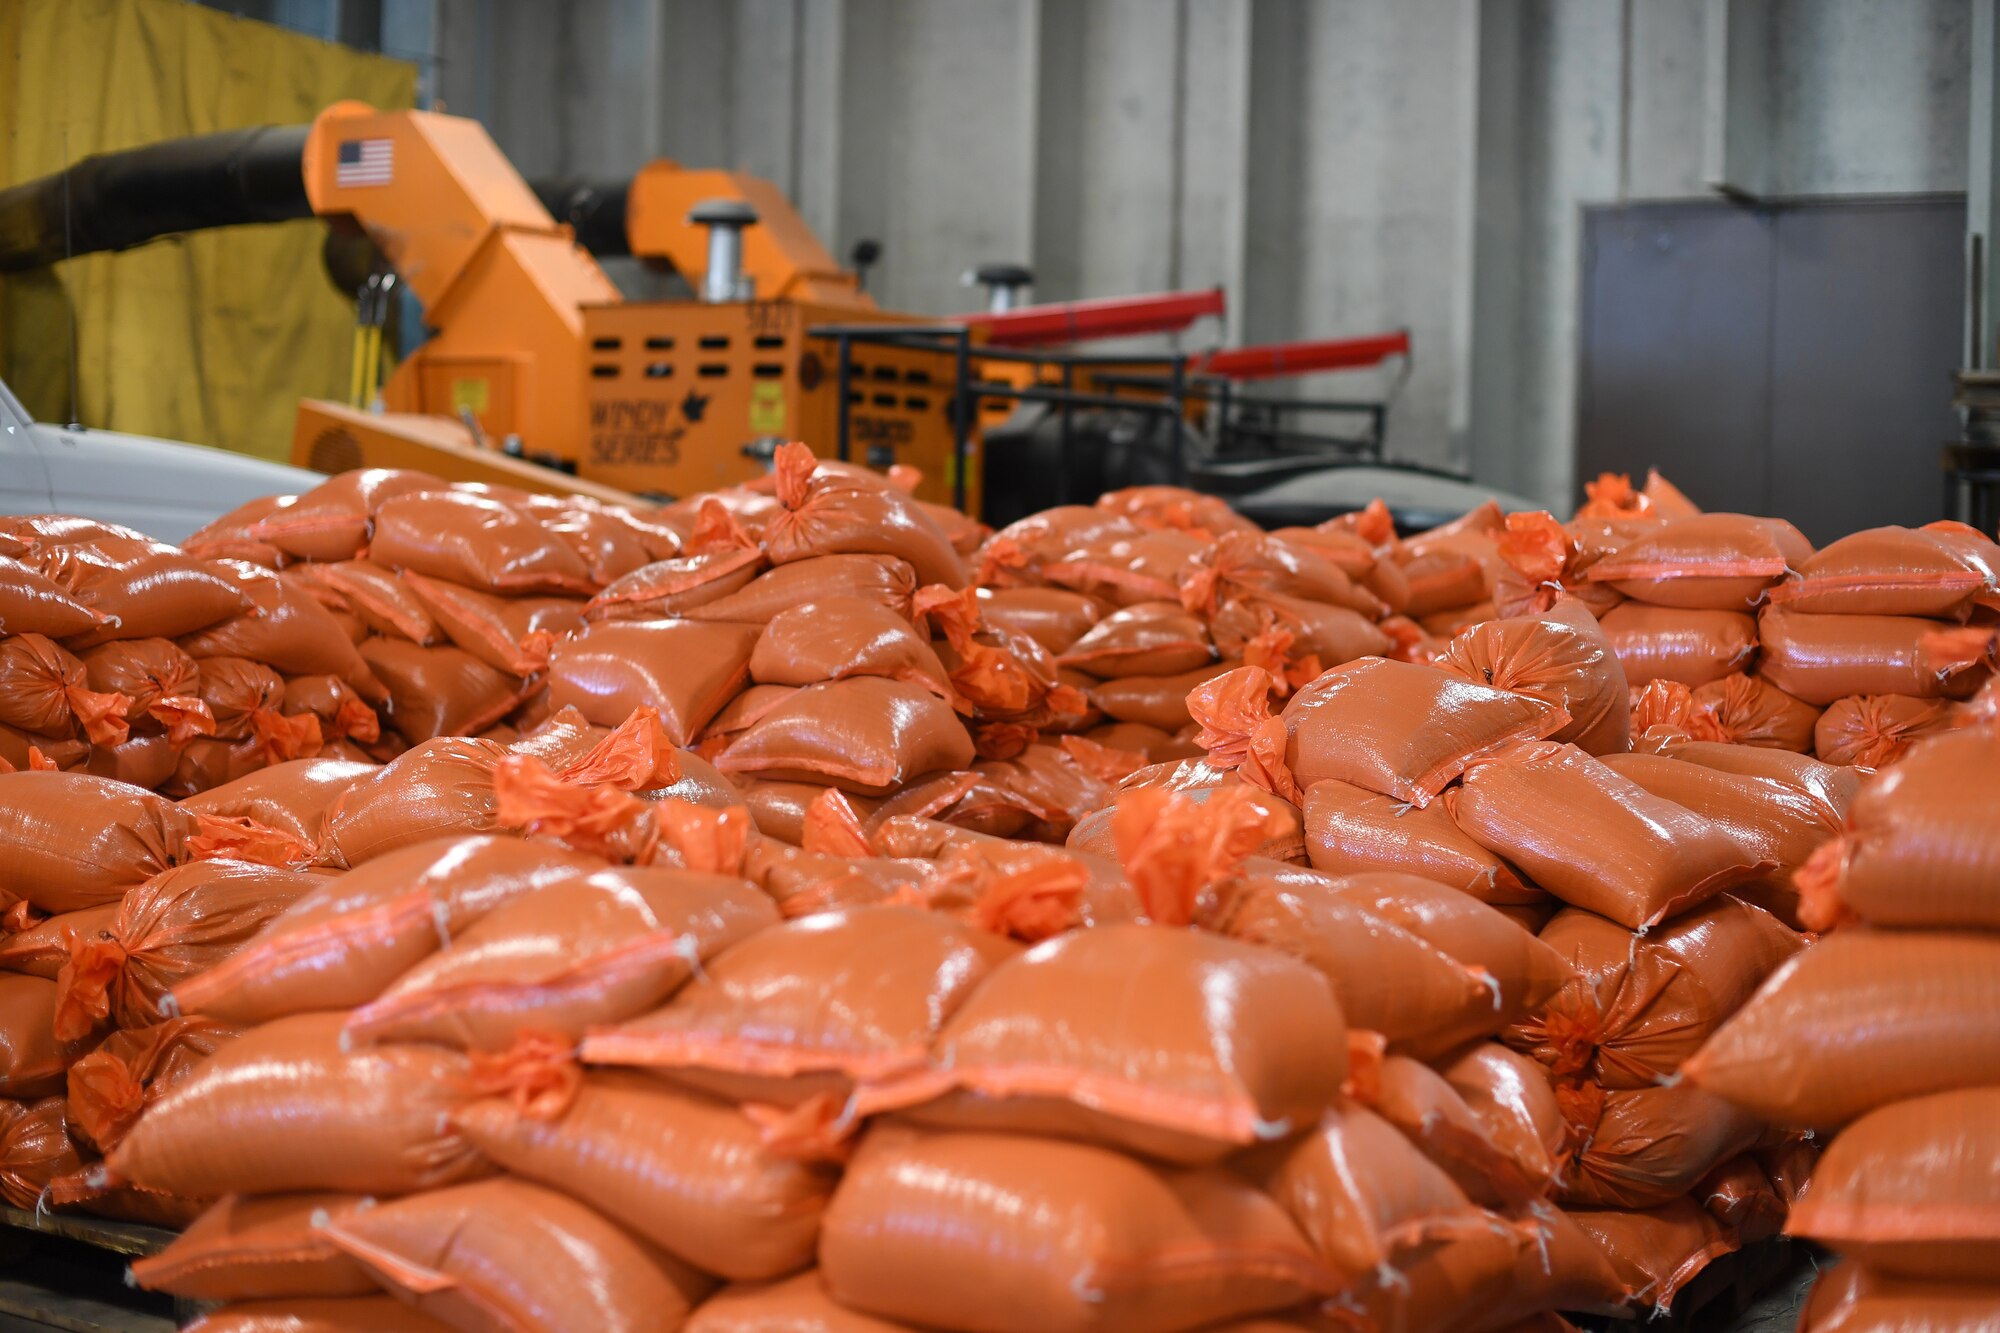 Completed sandbags sit on paletts during a sandbag stockpile event March 28, 2019, in Grand Forks, North Dakota. Each pallet held between 50-70 bags, meant to protect the city of Grand Forks in case of flooding in April. (U.S. Air Force photo by Senior Airman Elora J. Martinez)